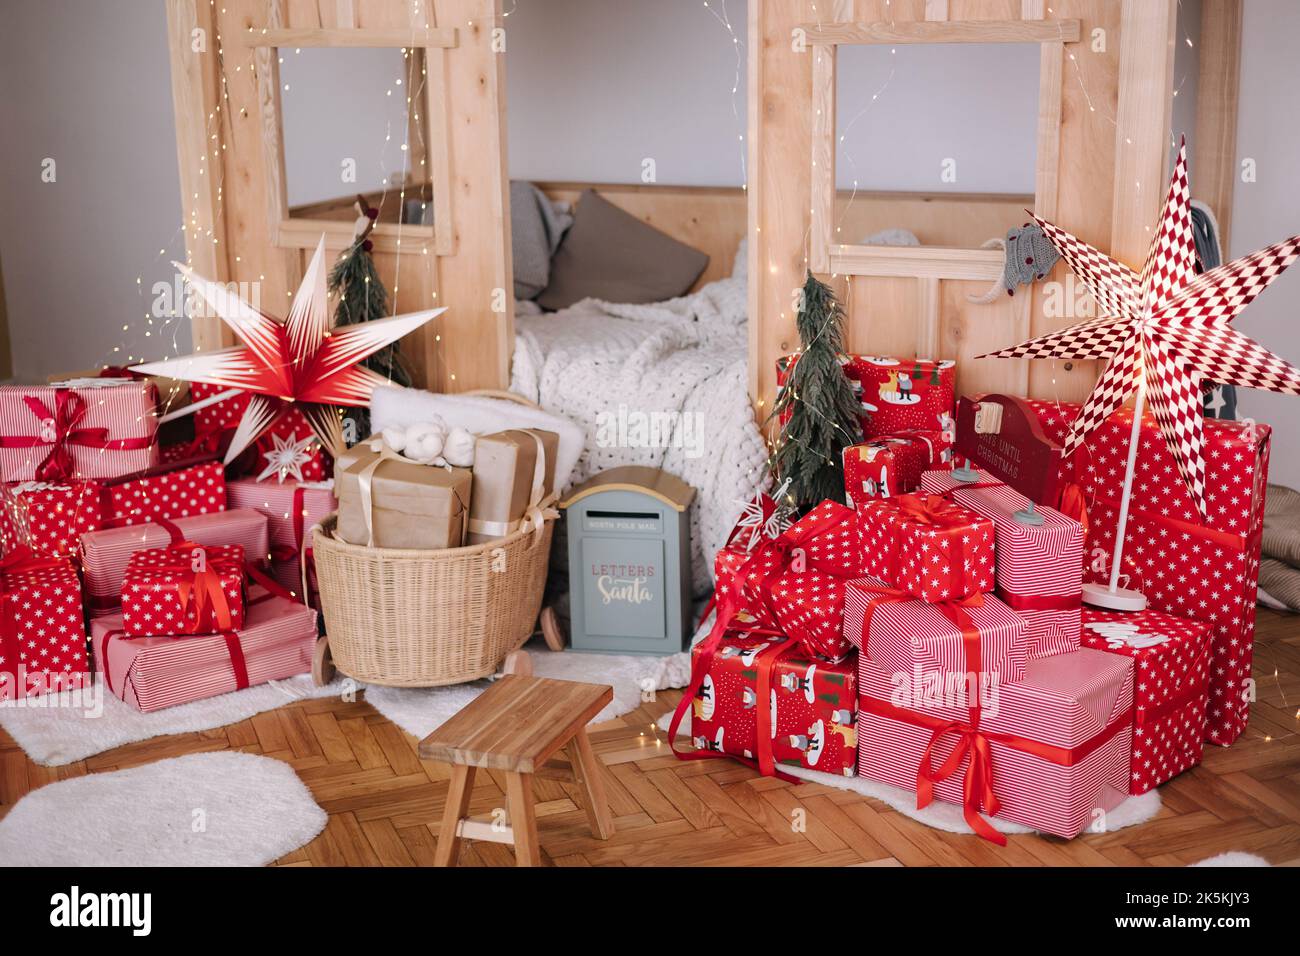 Children room with Christmas decorations. Presents in red festive packaging. Interior design for kids Stock Photo